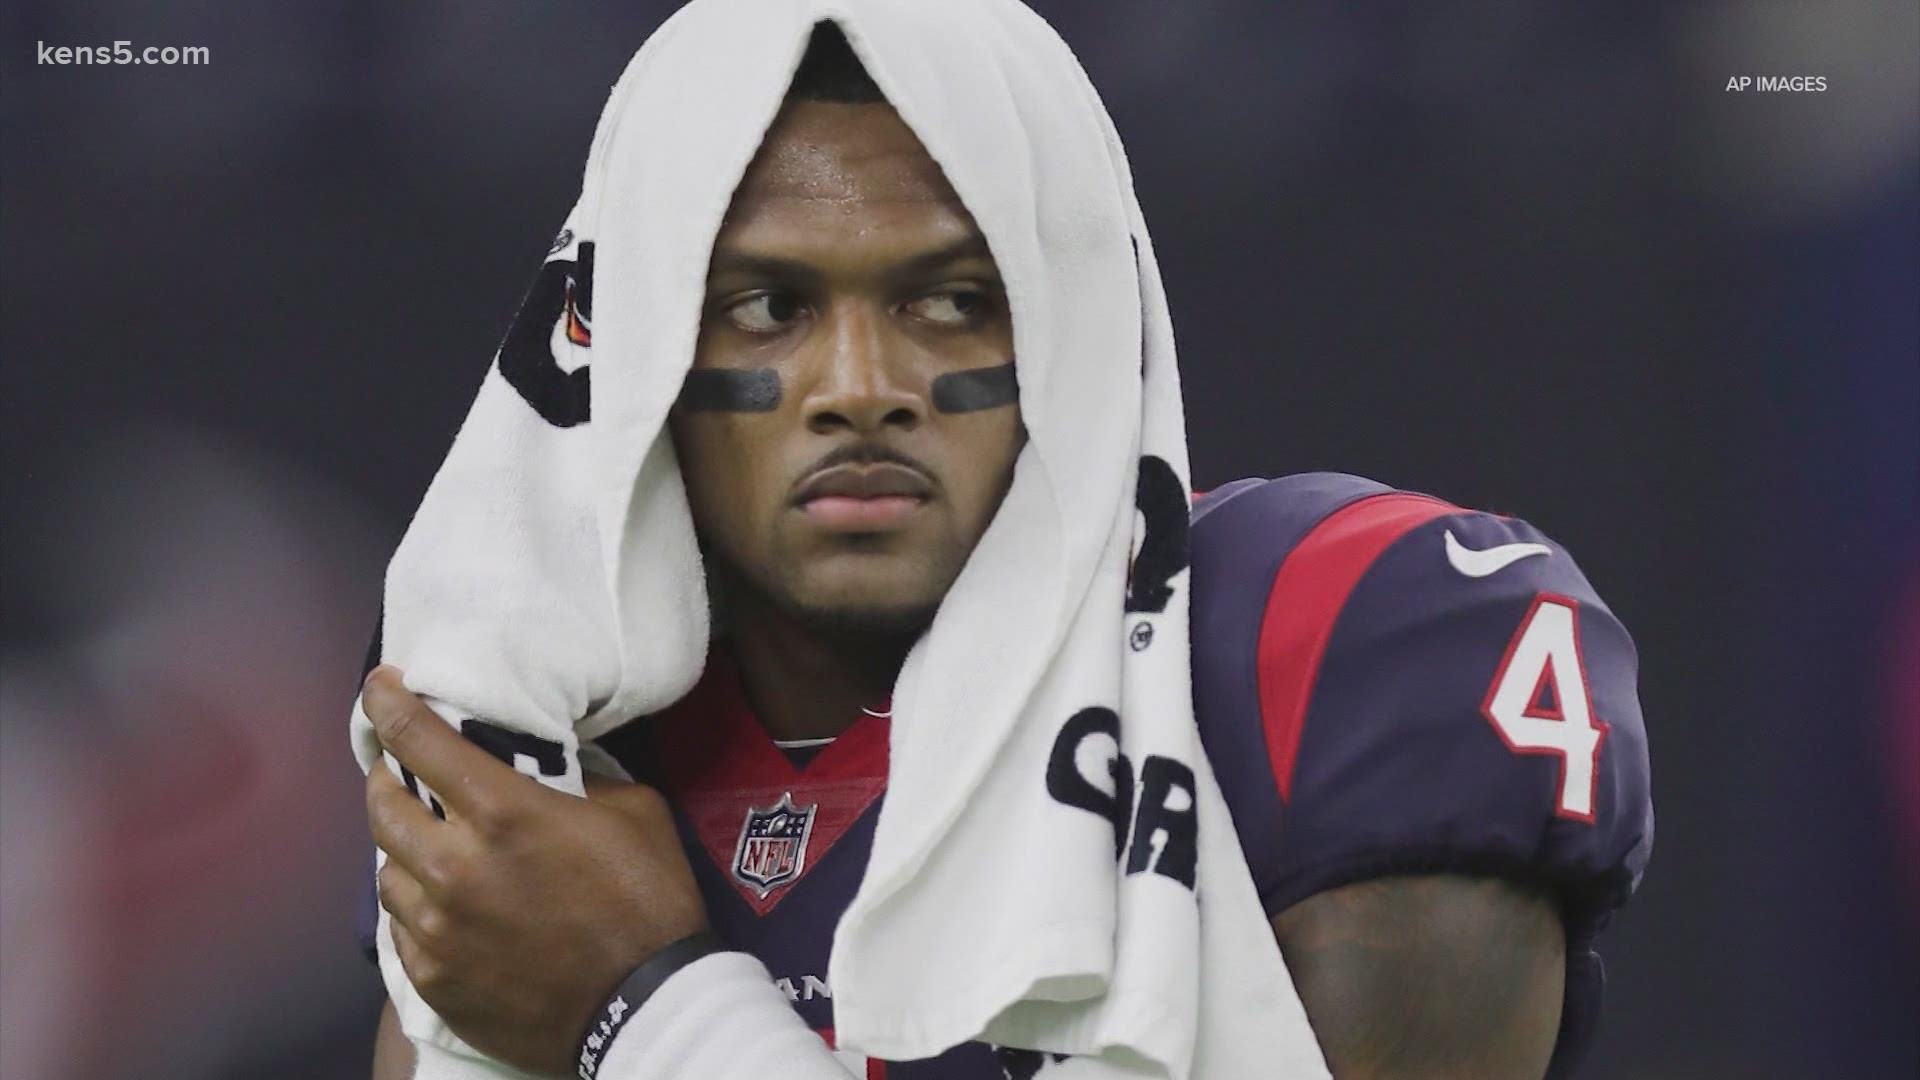 Watson confirmed reports that he's angry with the Texans' management. Here are the reasons for the rift.